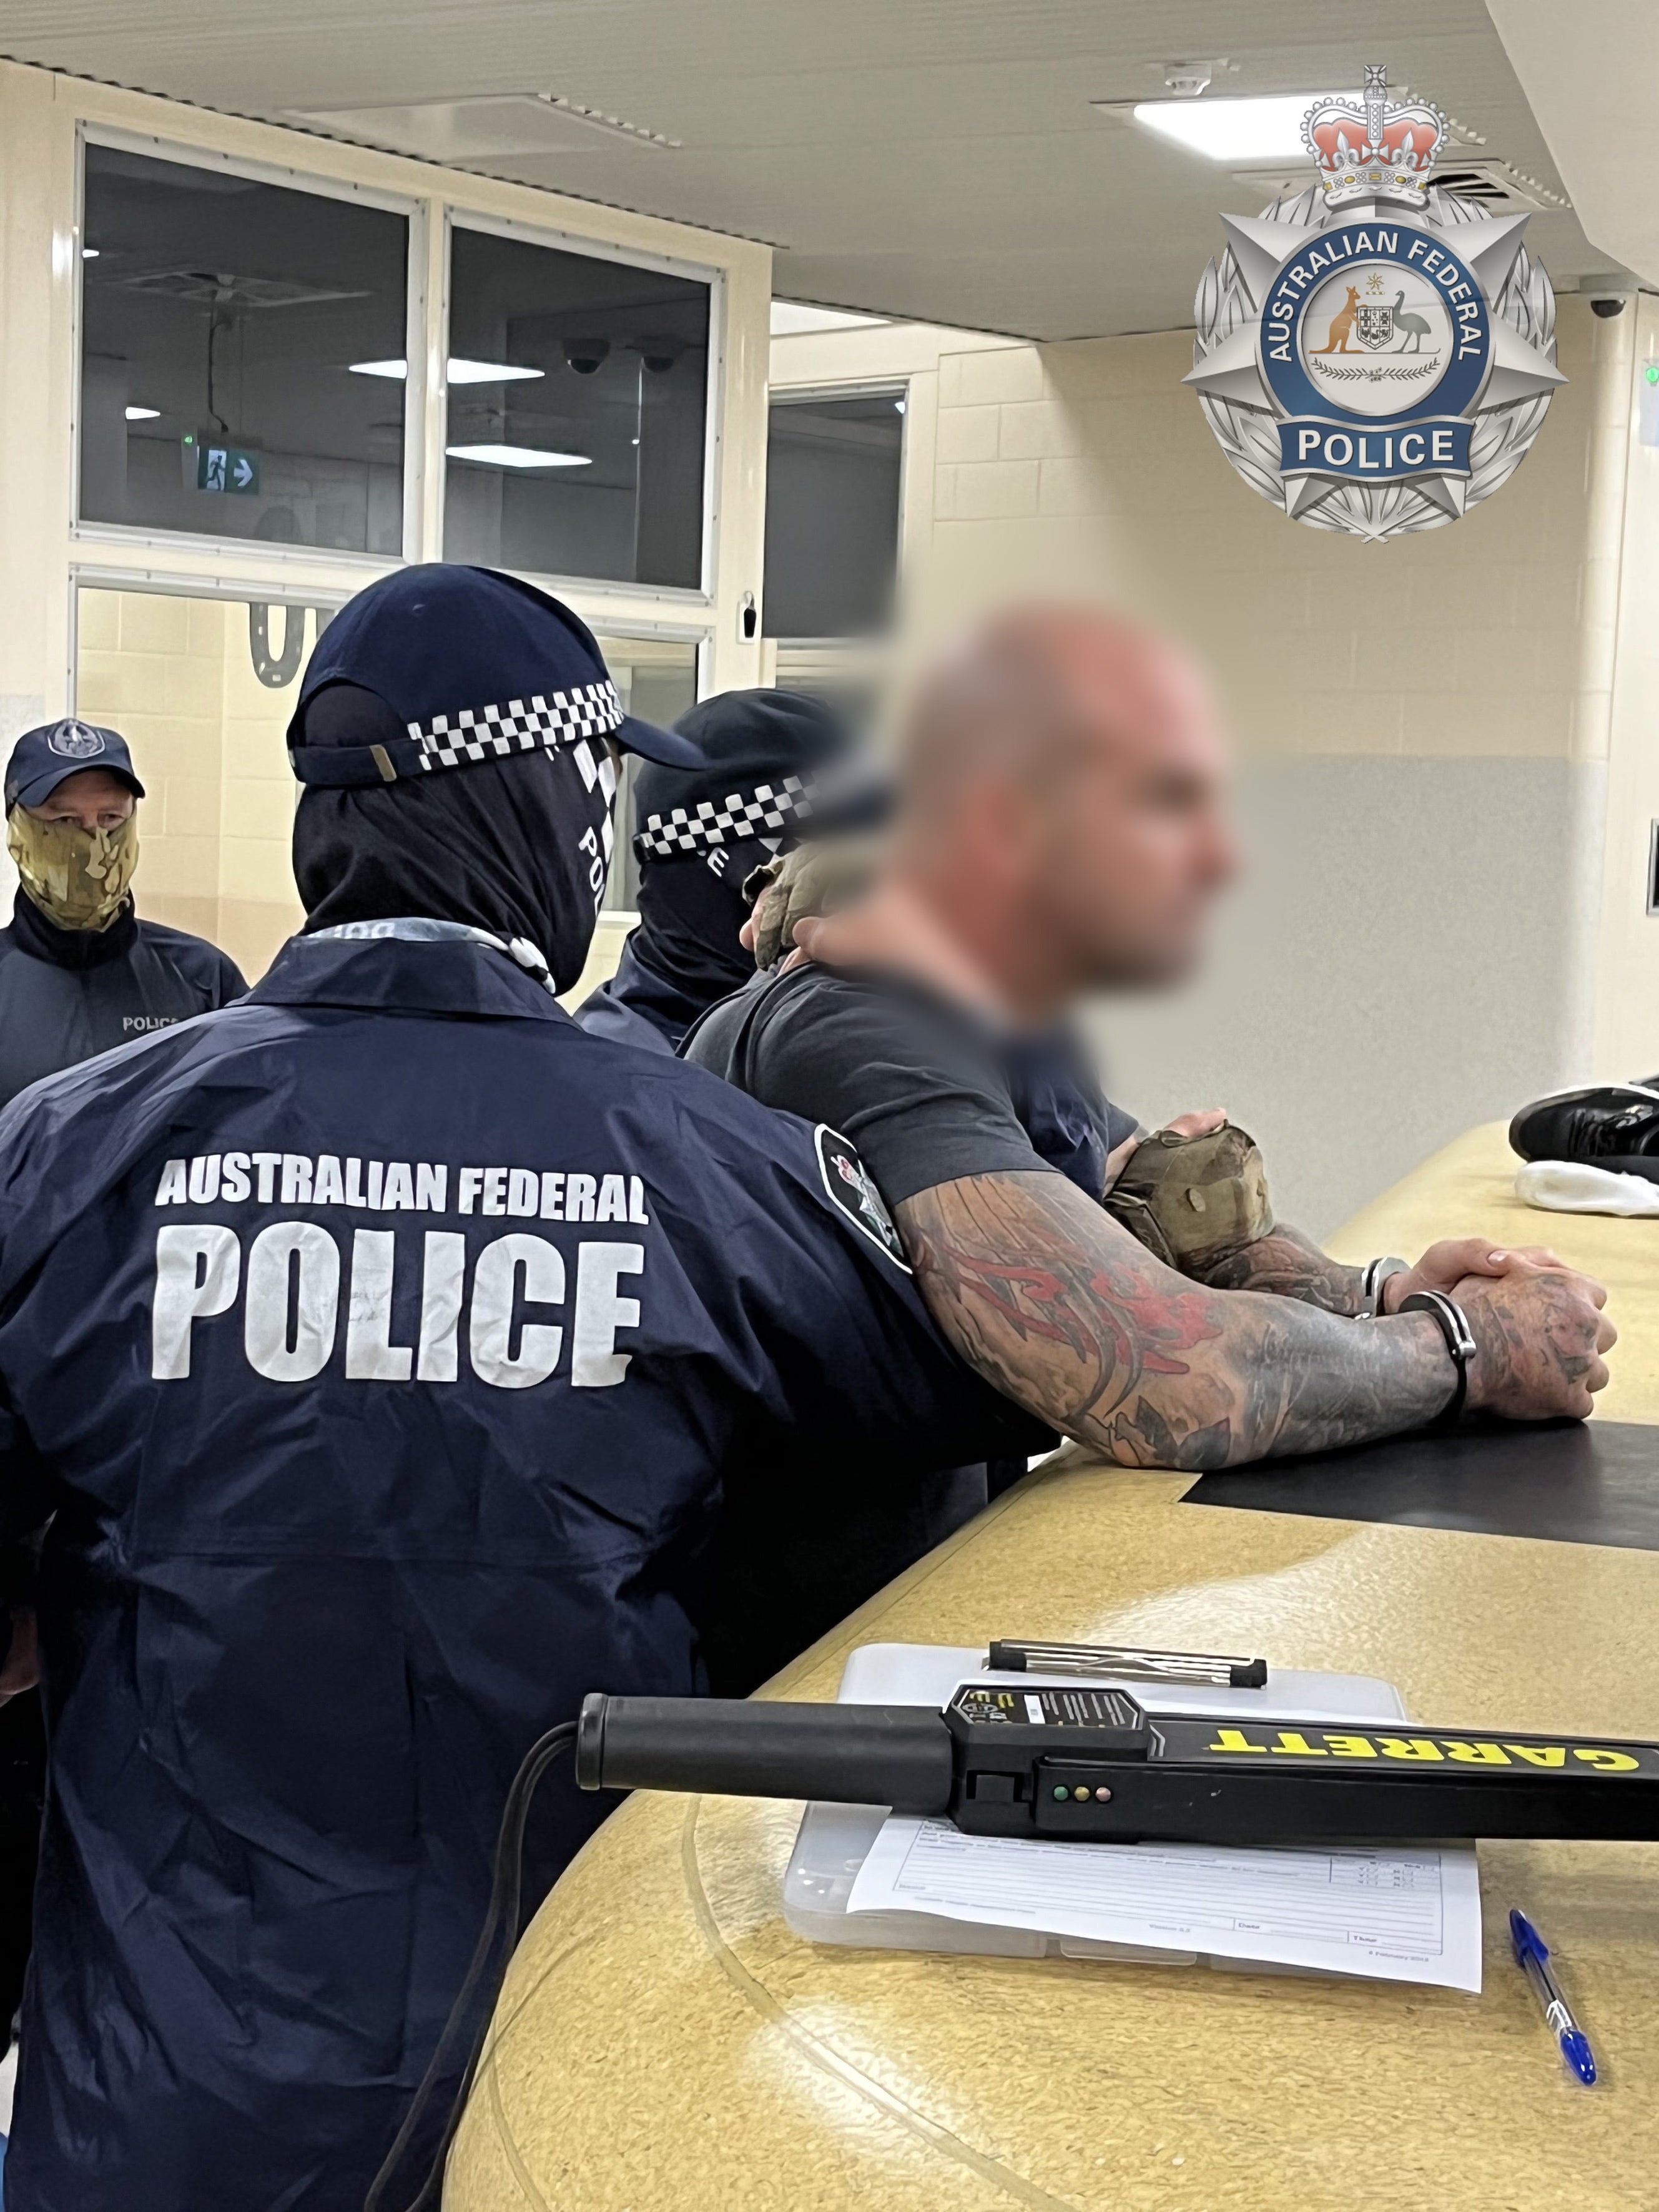 Mark Buddle Australian Motorcycle Gang Boss Extradited From Turkey To Face Criminal Charges At